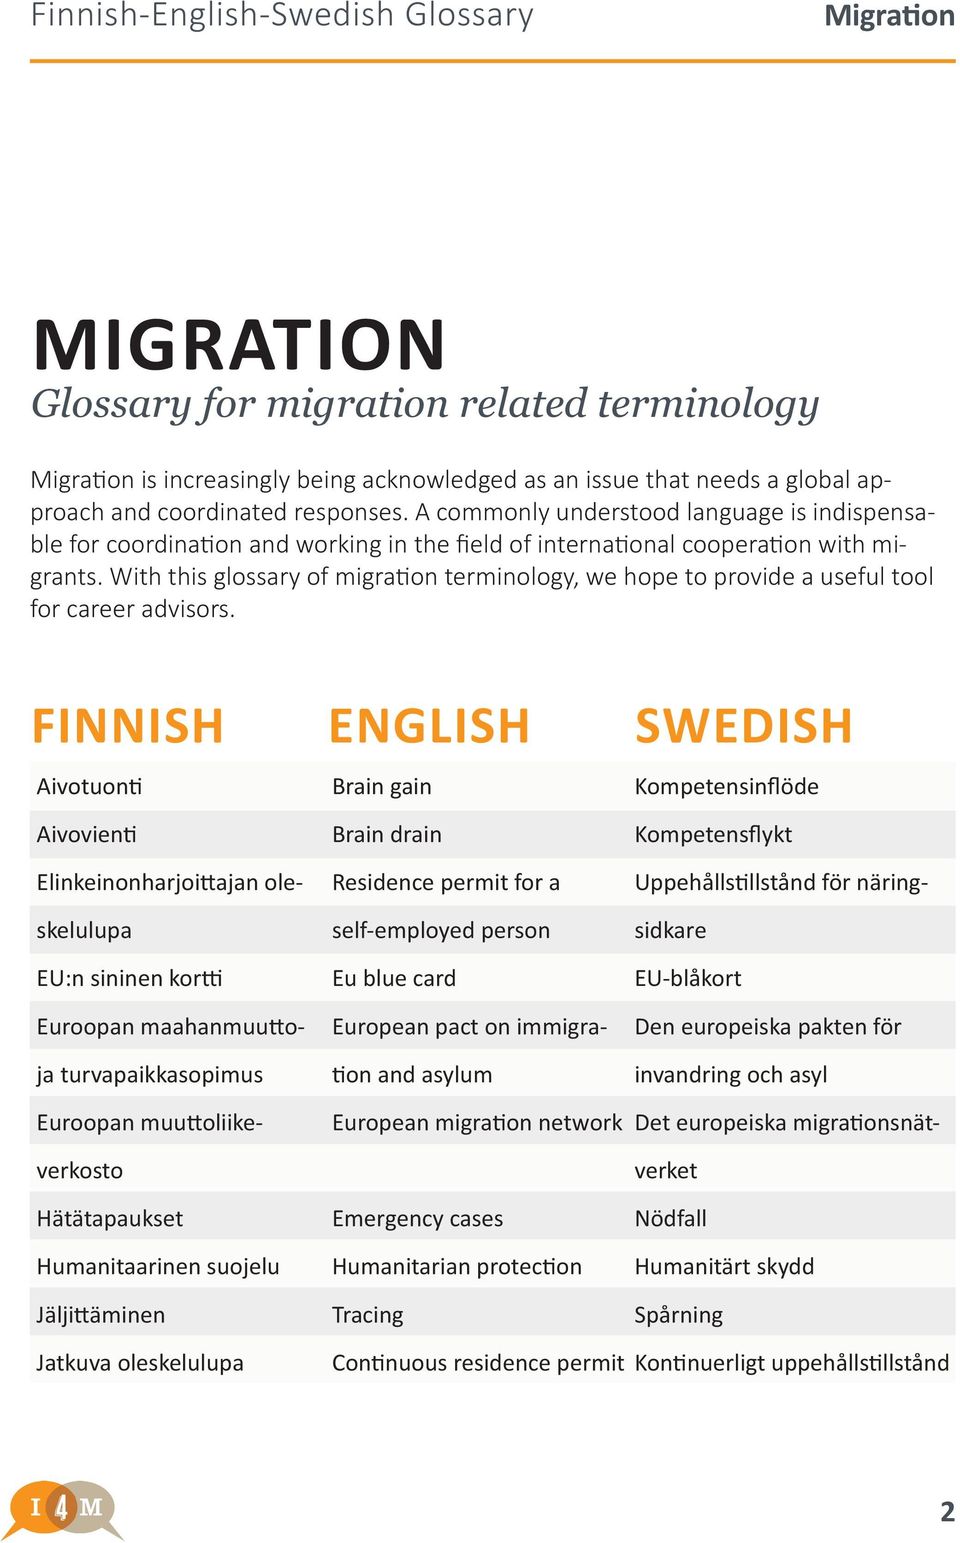 With this glossary of migration terminology, we hope to provide a useful tool for career advisors.